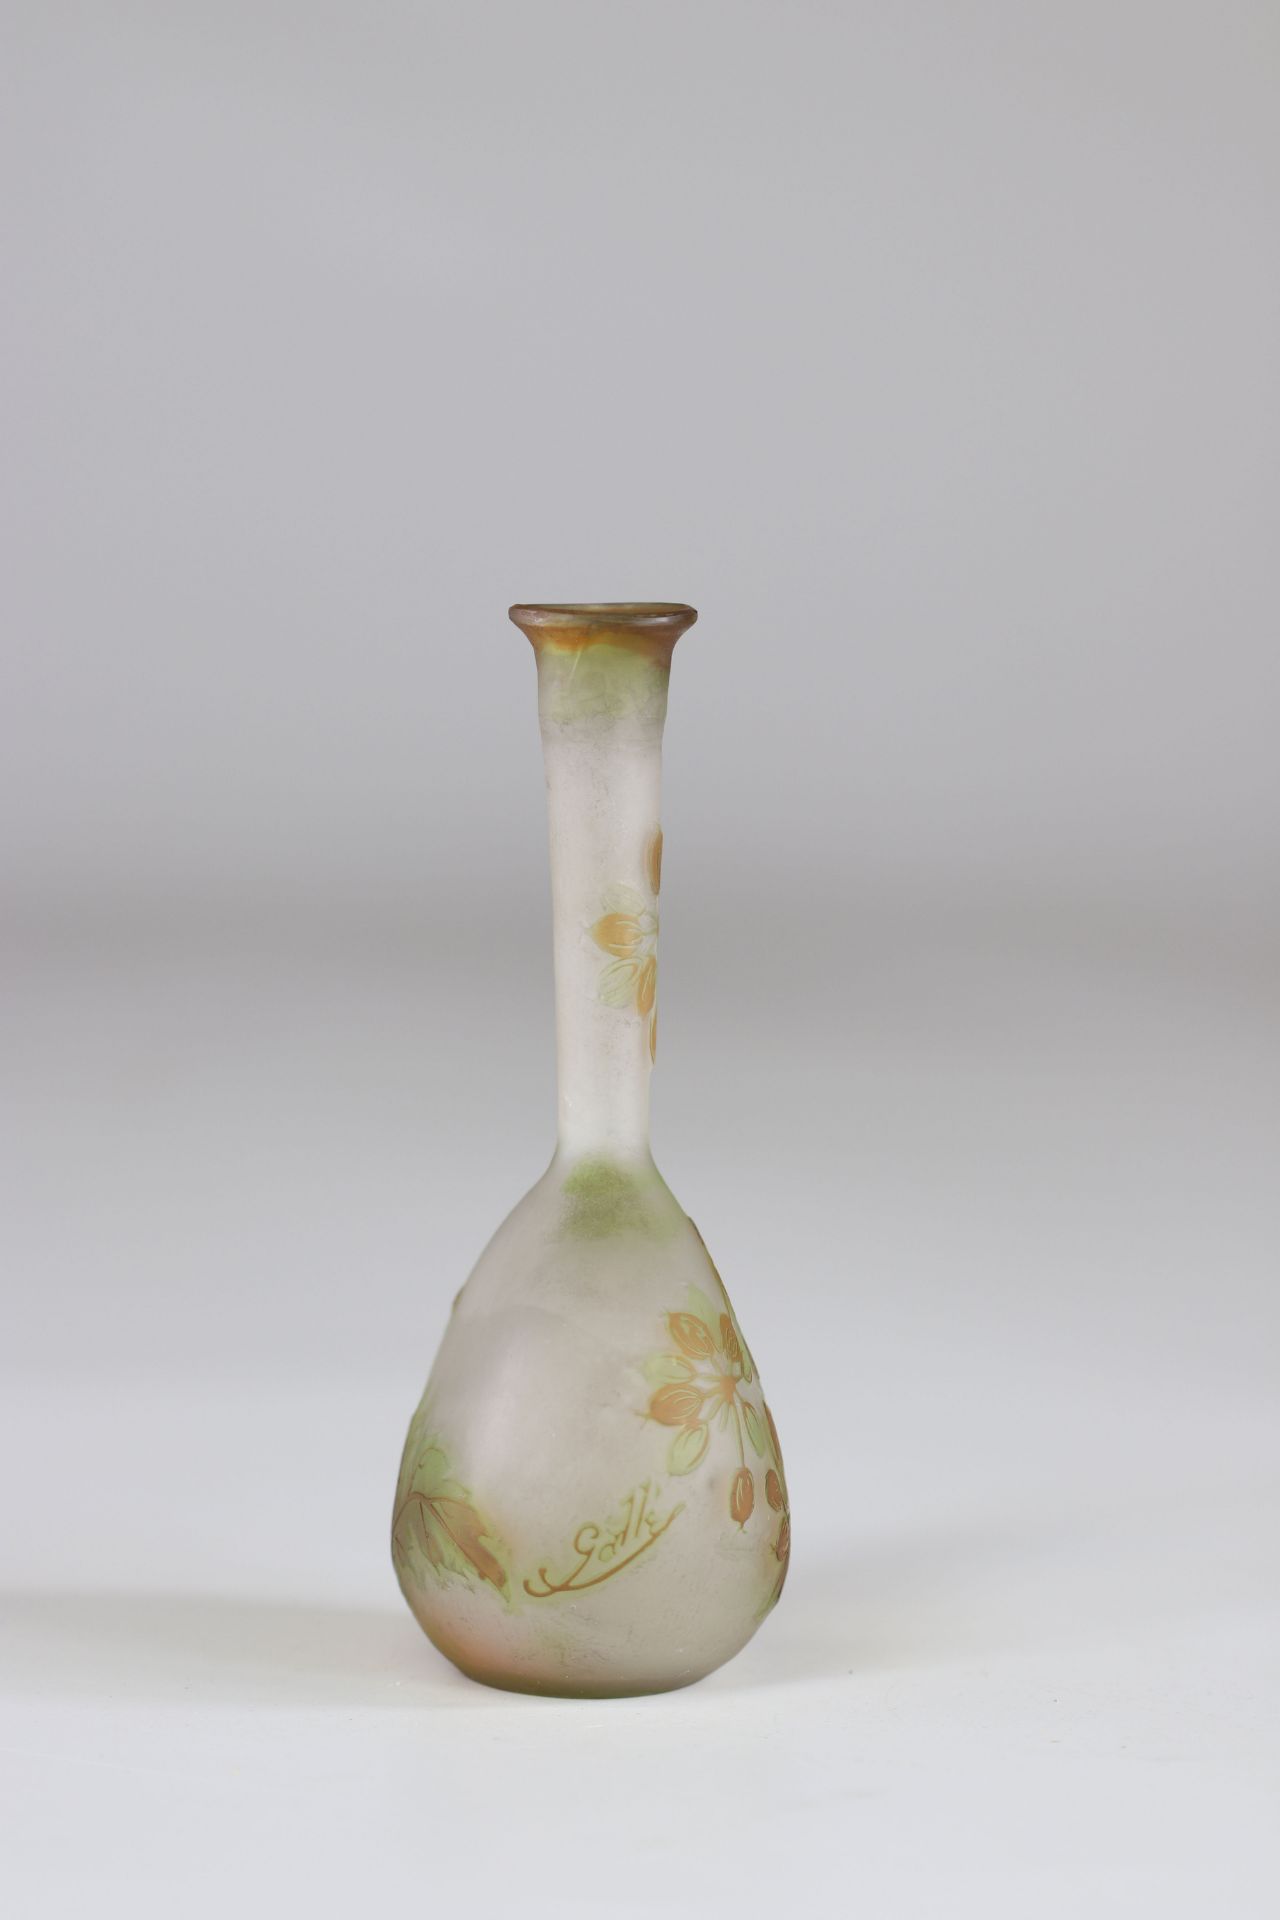 Emile Galle vase cleared with acid "flower decoration" - Image 4 of 4